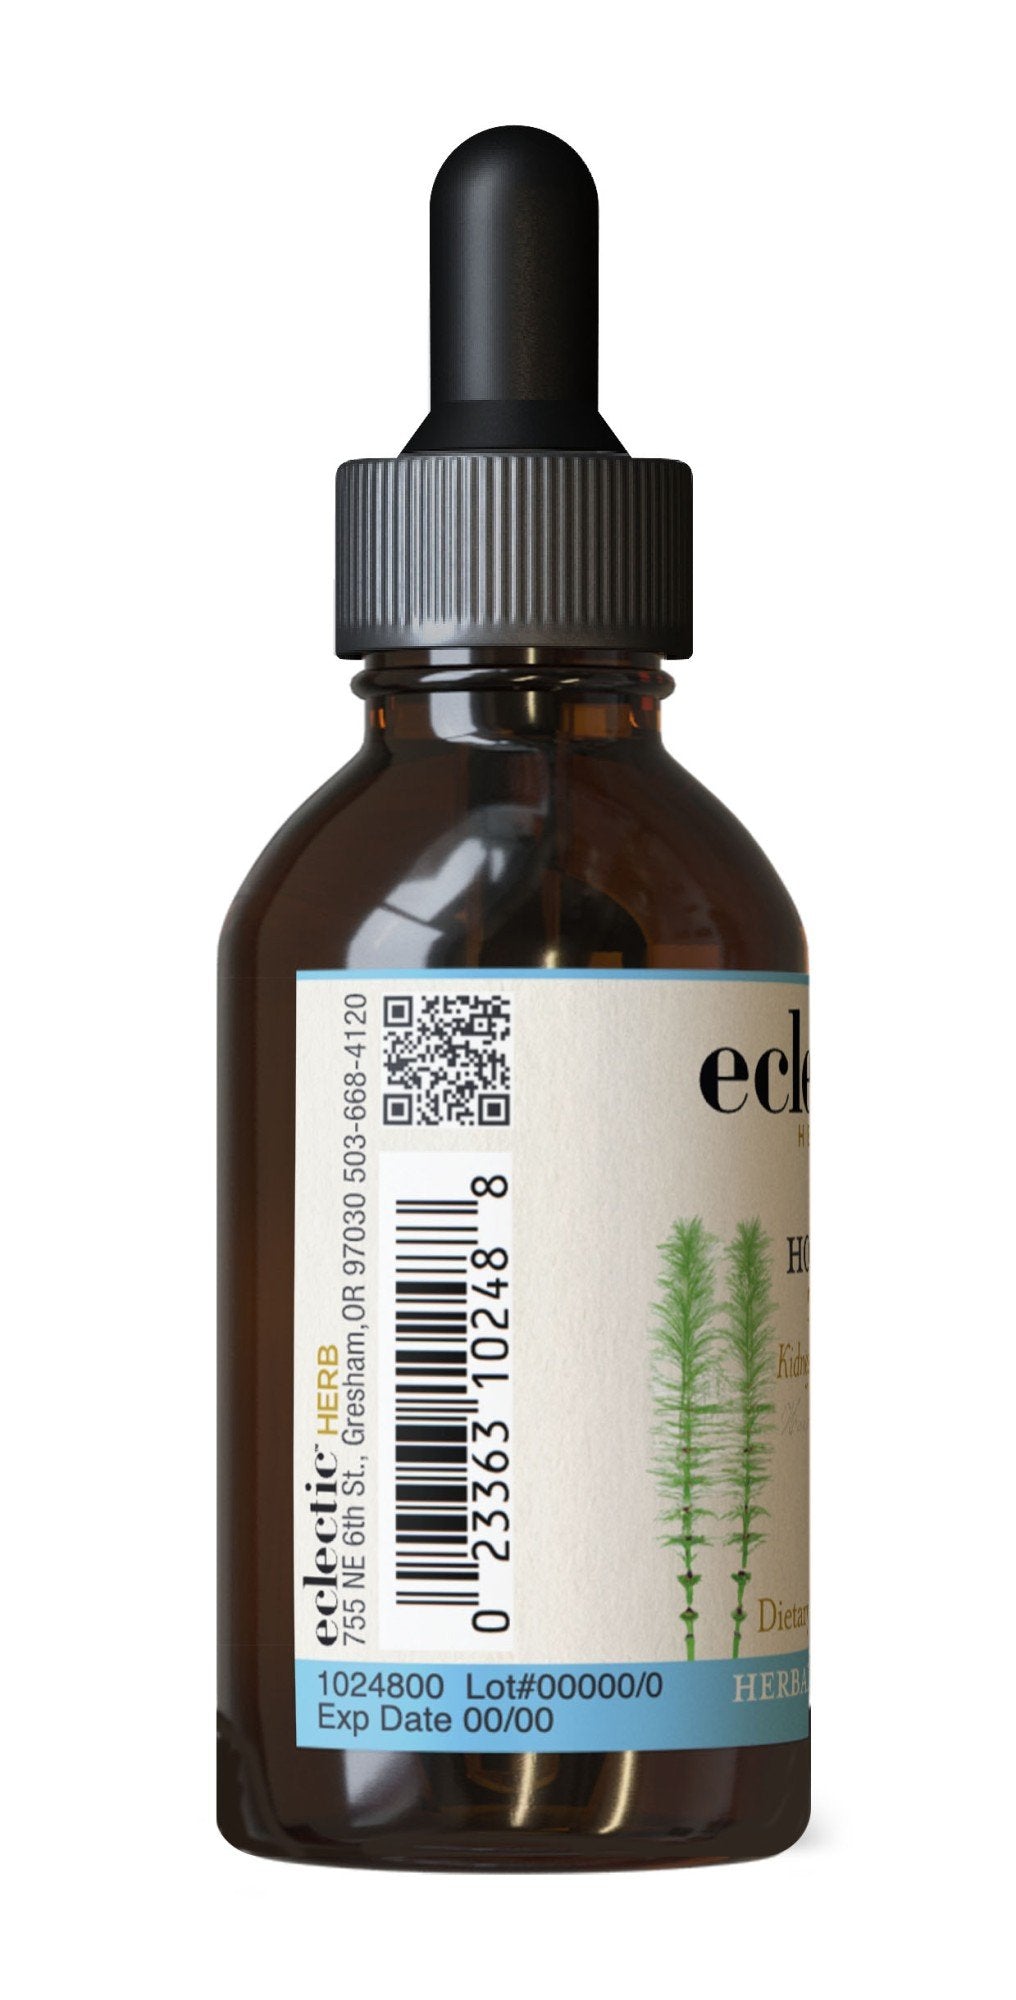 Eclectic Herb Horsetail Extract 2 oz Liquid